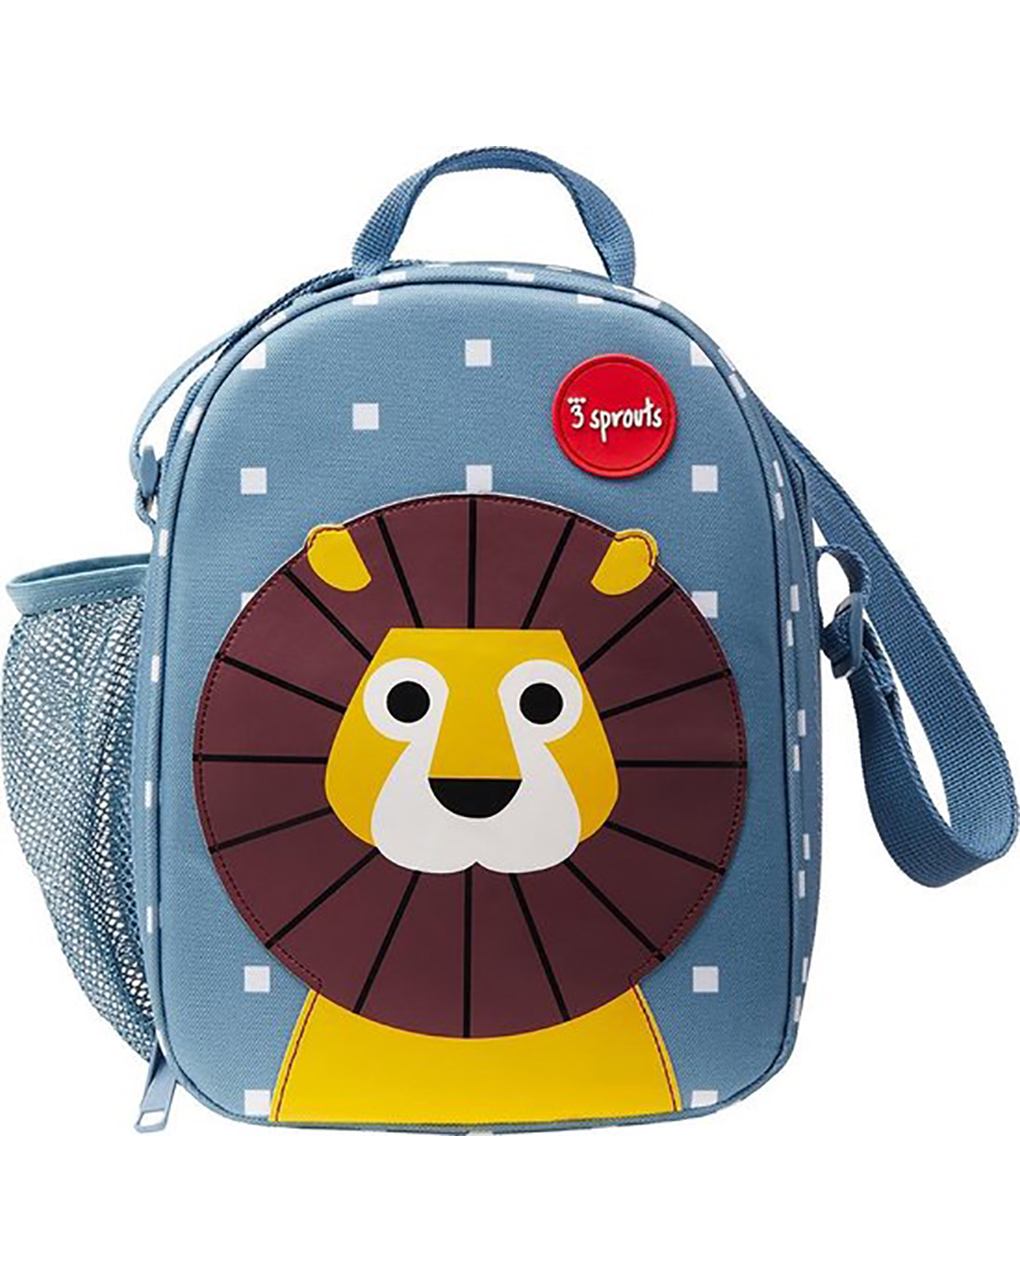 3sprouts lunch bag lion